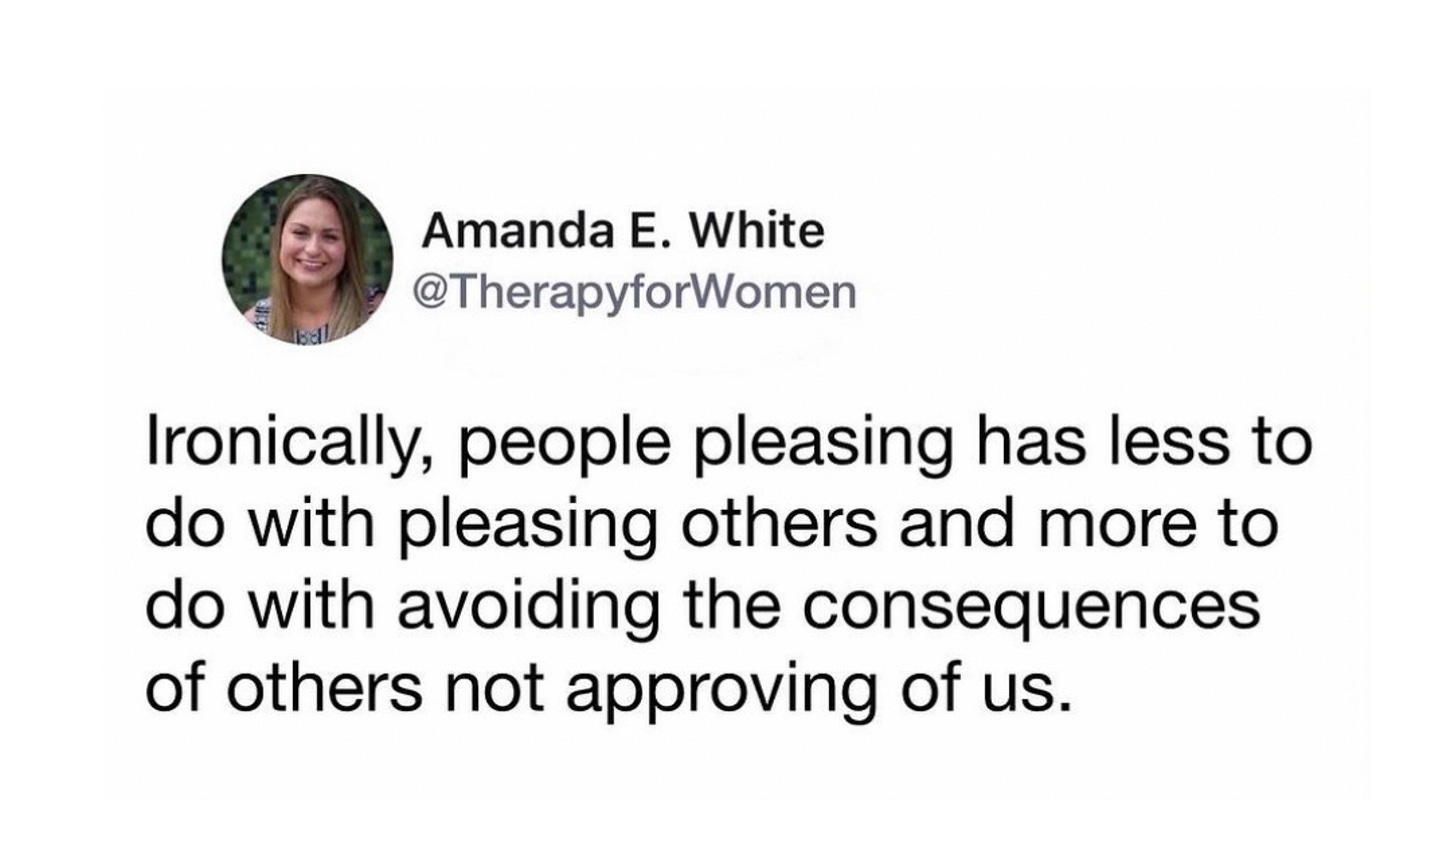 Ironically, people pleasing is less to do with pleasing others and more to do with avoiding the consequences of others not approving us.